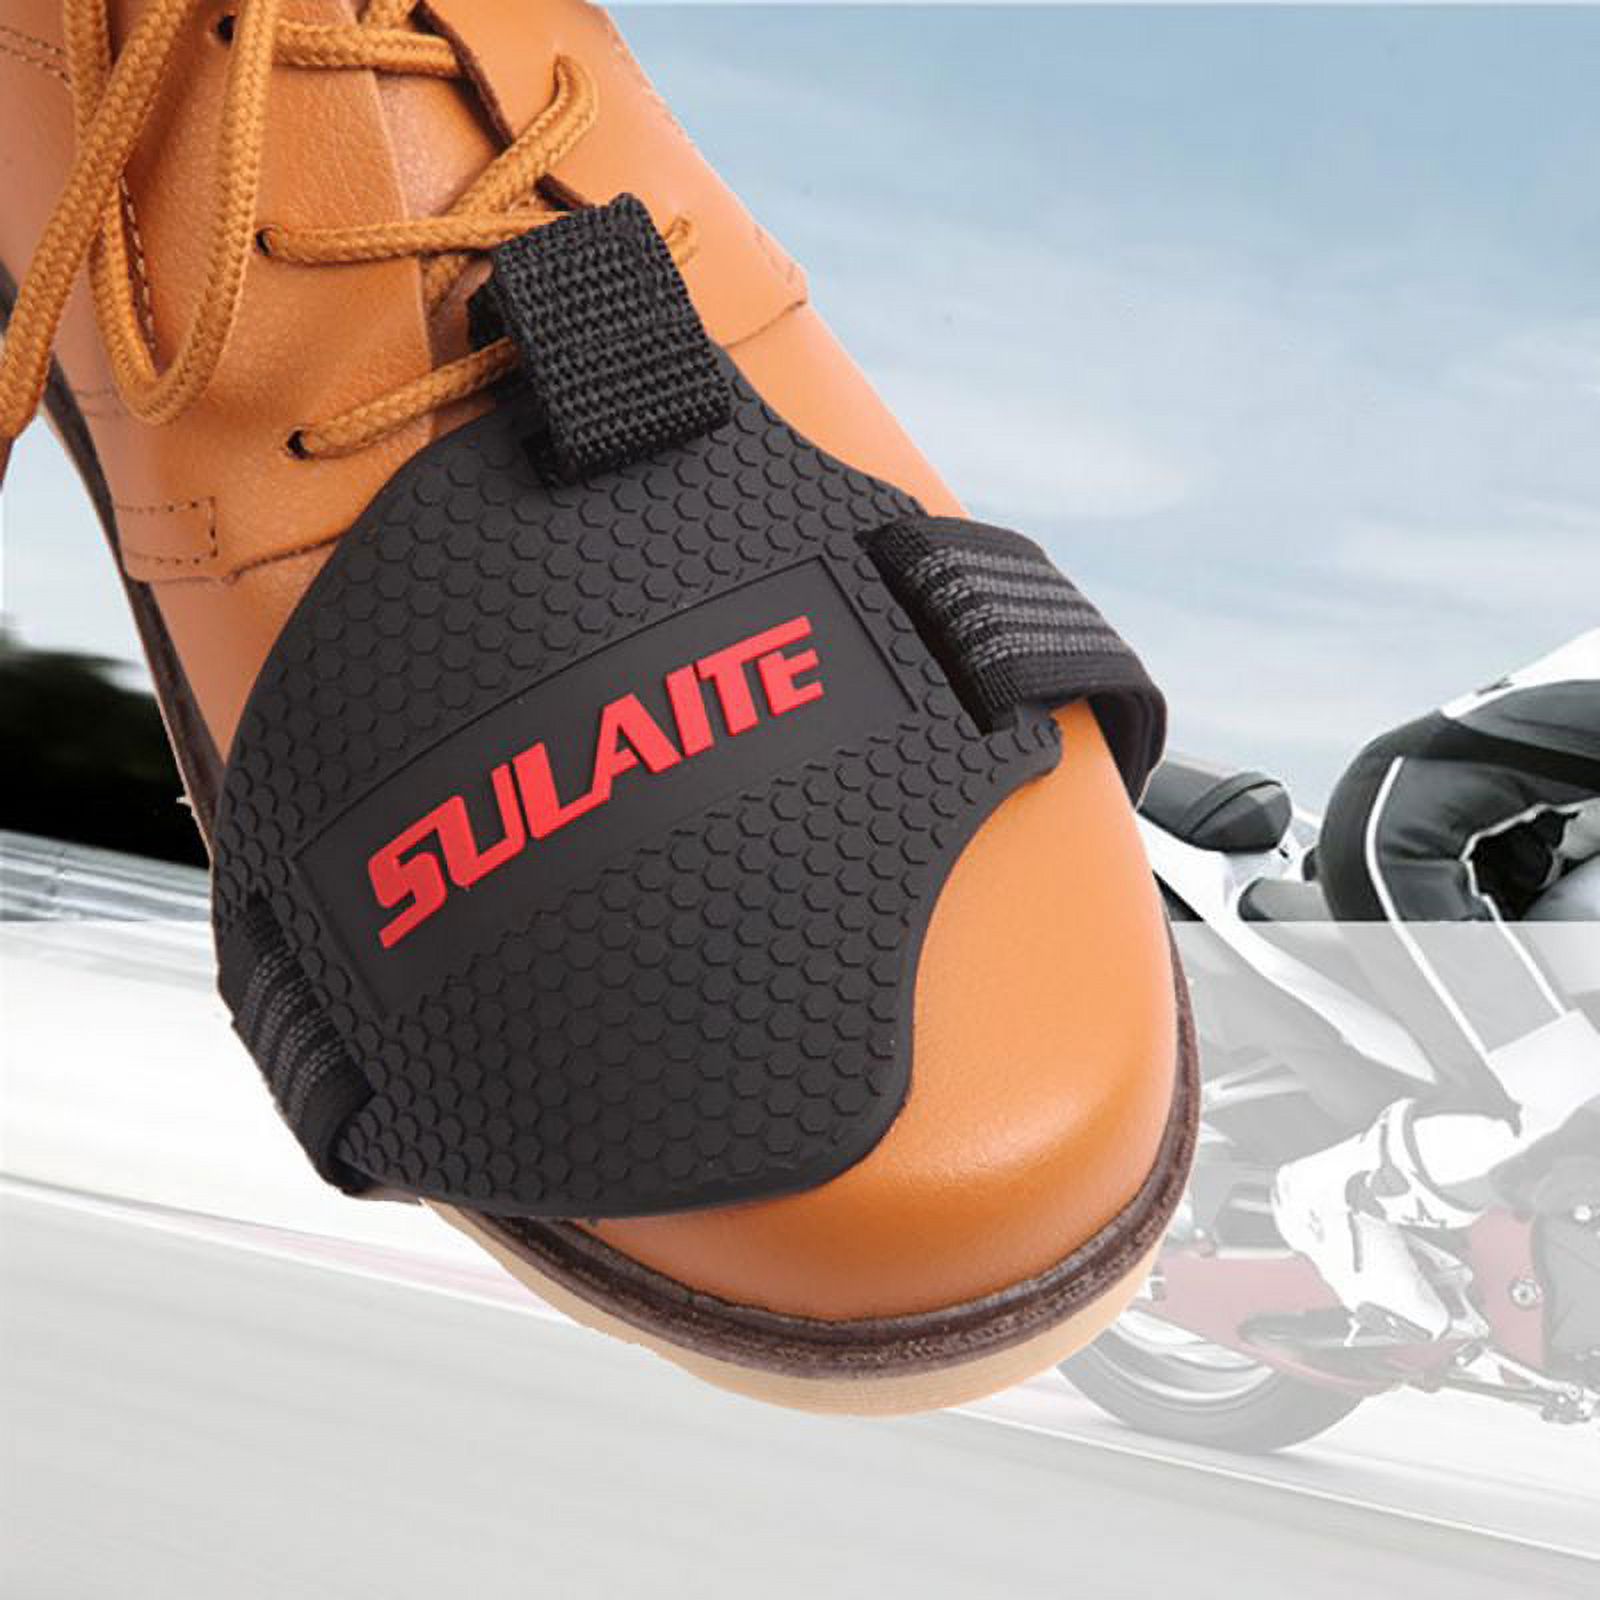 Stronger Rubber Motorcycle Gear Shifter Shoe Boots Protector Shift Motorbike Boot Cover Protective Gear - image 5 of 5